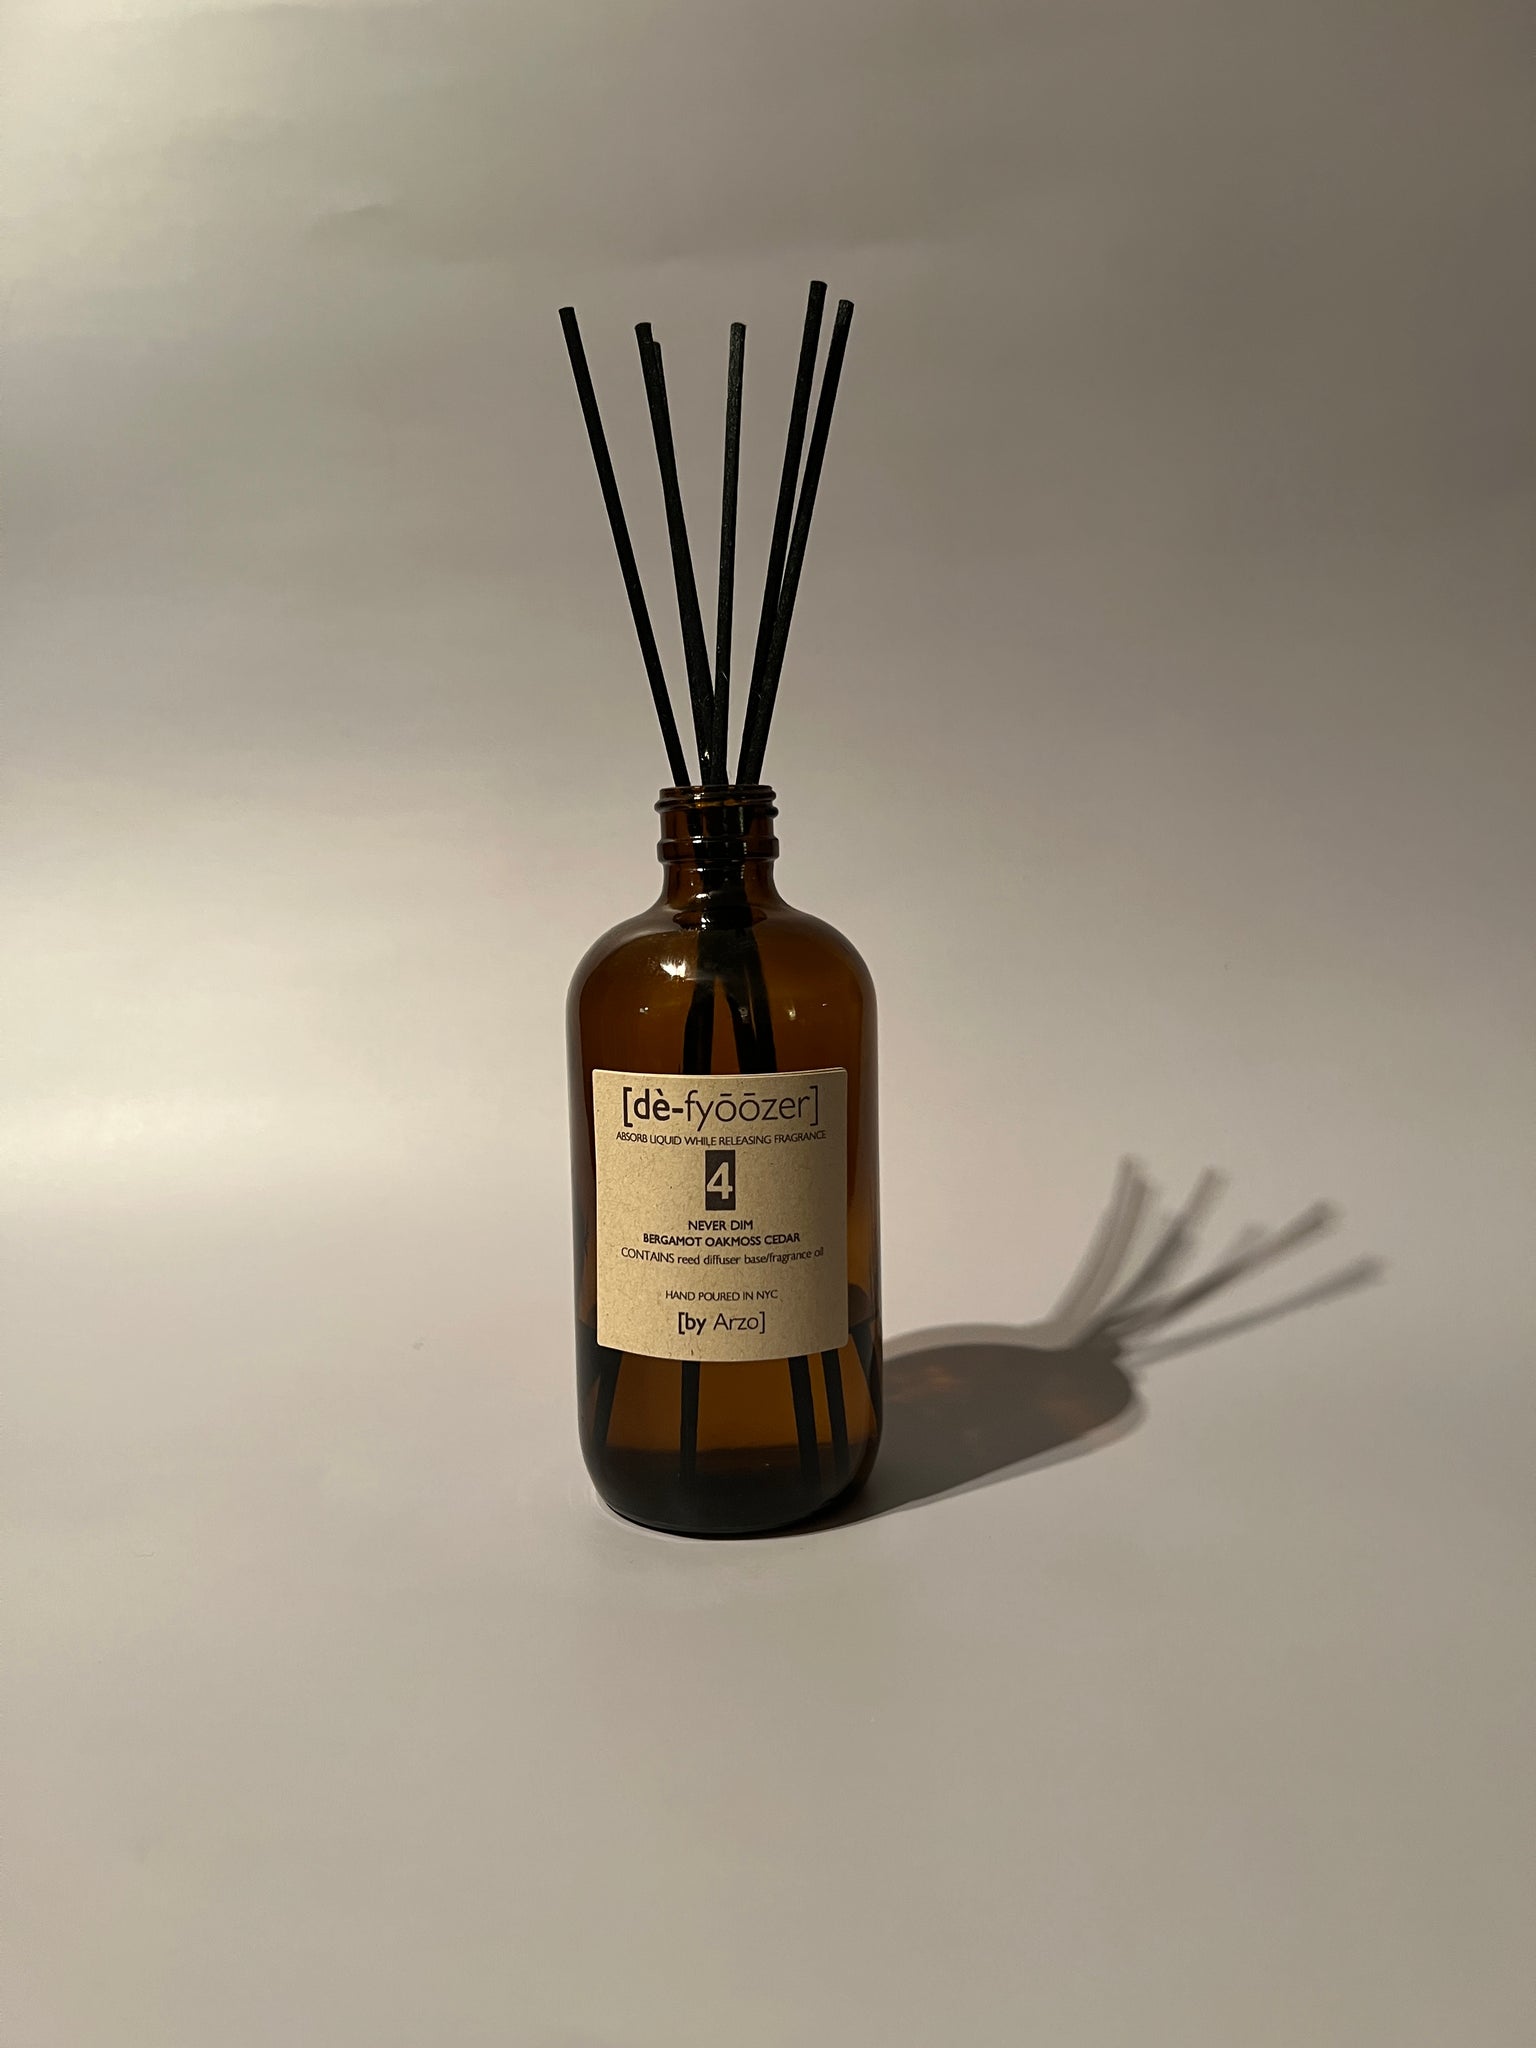 4 NEVER DIM REED DIFFUSER